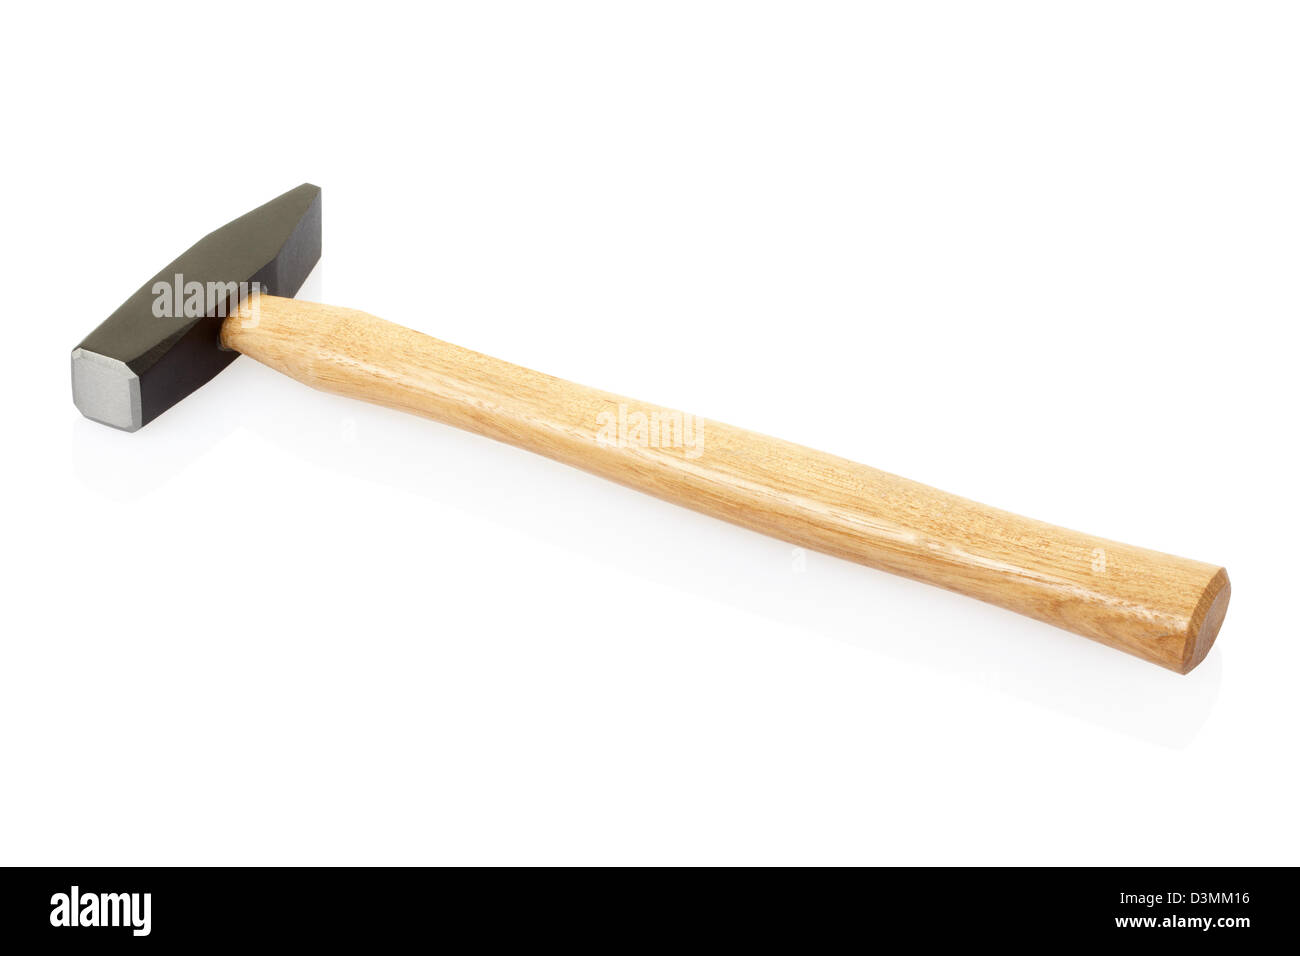 Hammer with wooden grip Stock Photo